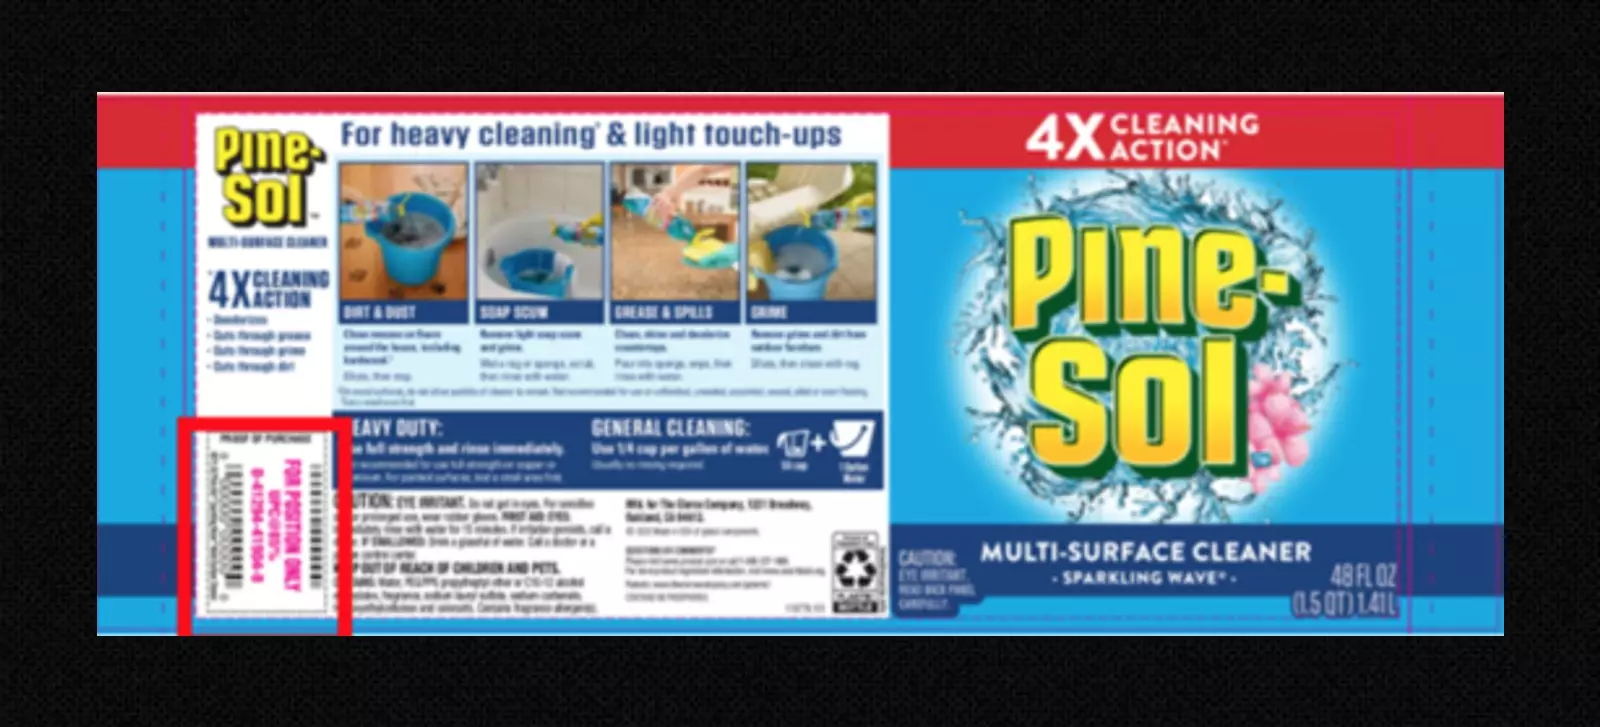 What to Know About the Pine-Sol Recall - The New York Times